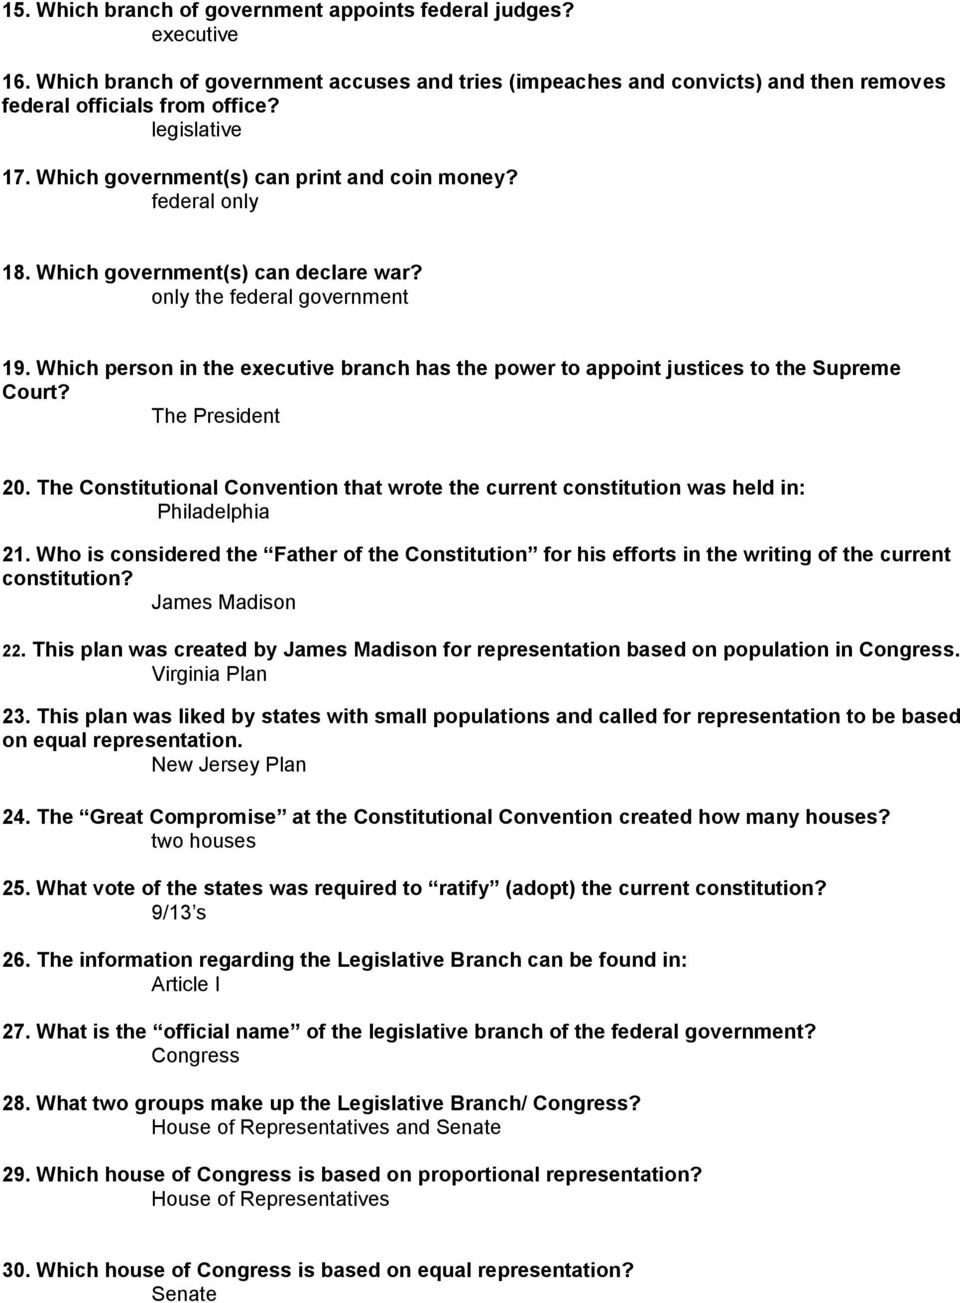 The Us Constitution Worksheet the Us Constitution Worksheet Virginia Plan Answers